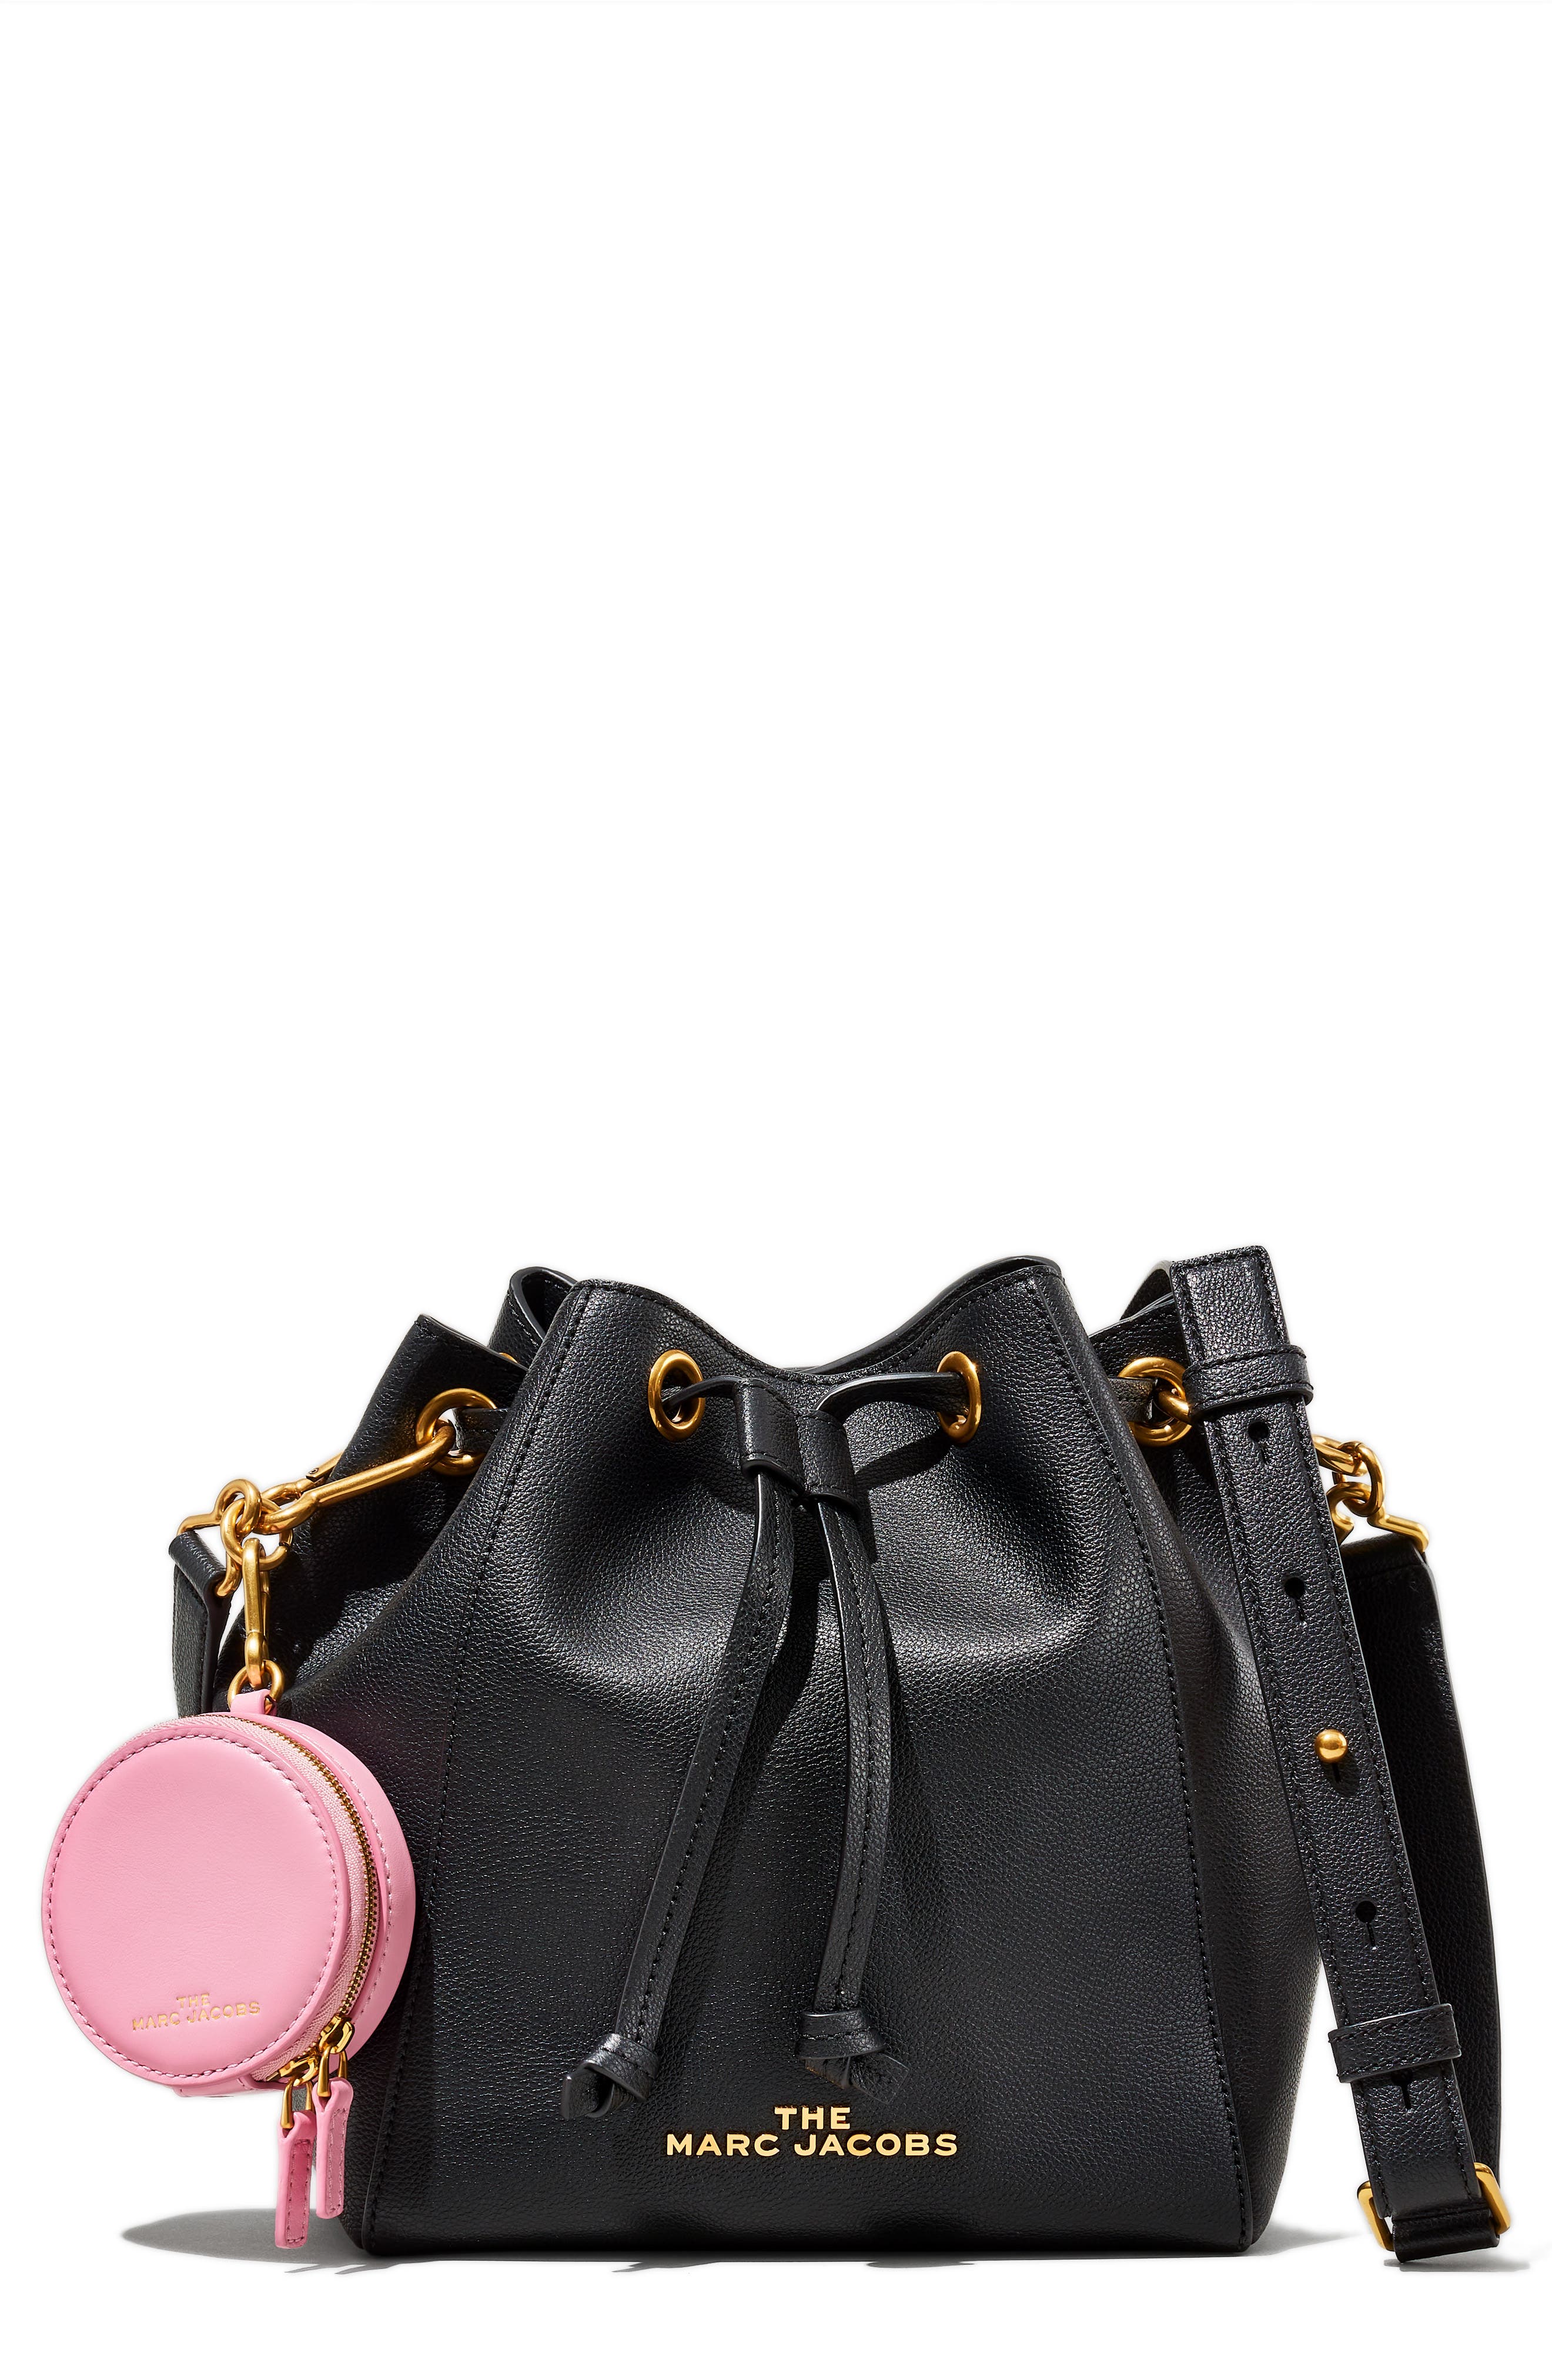 Marc Jacobs Black Leather Crossbody Bag Online Shop, UP TO 55% OFF 